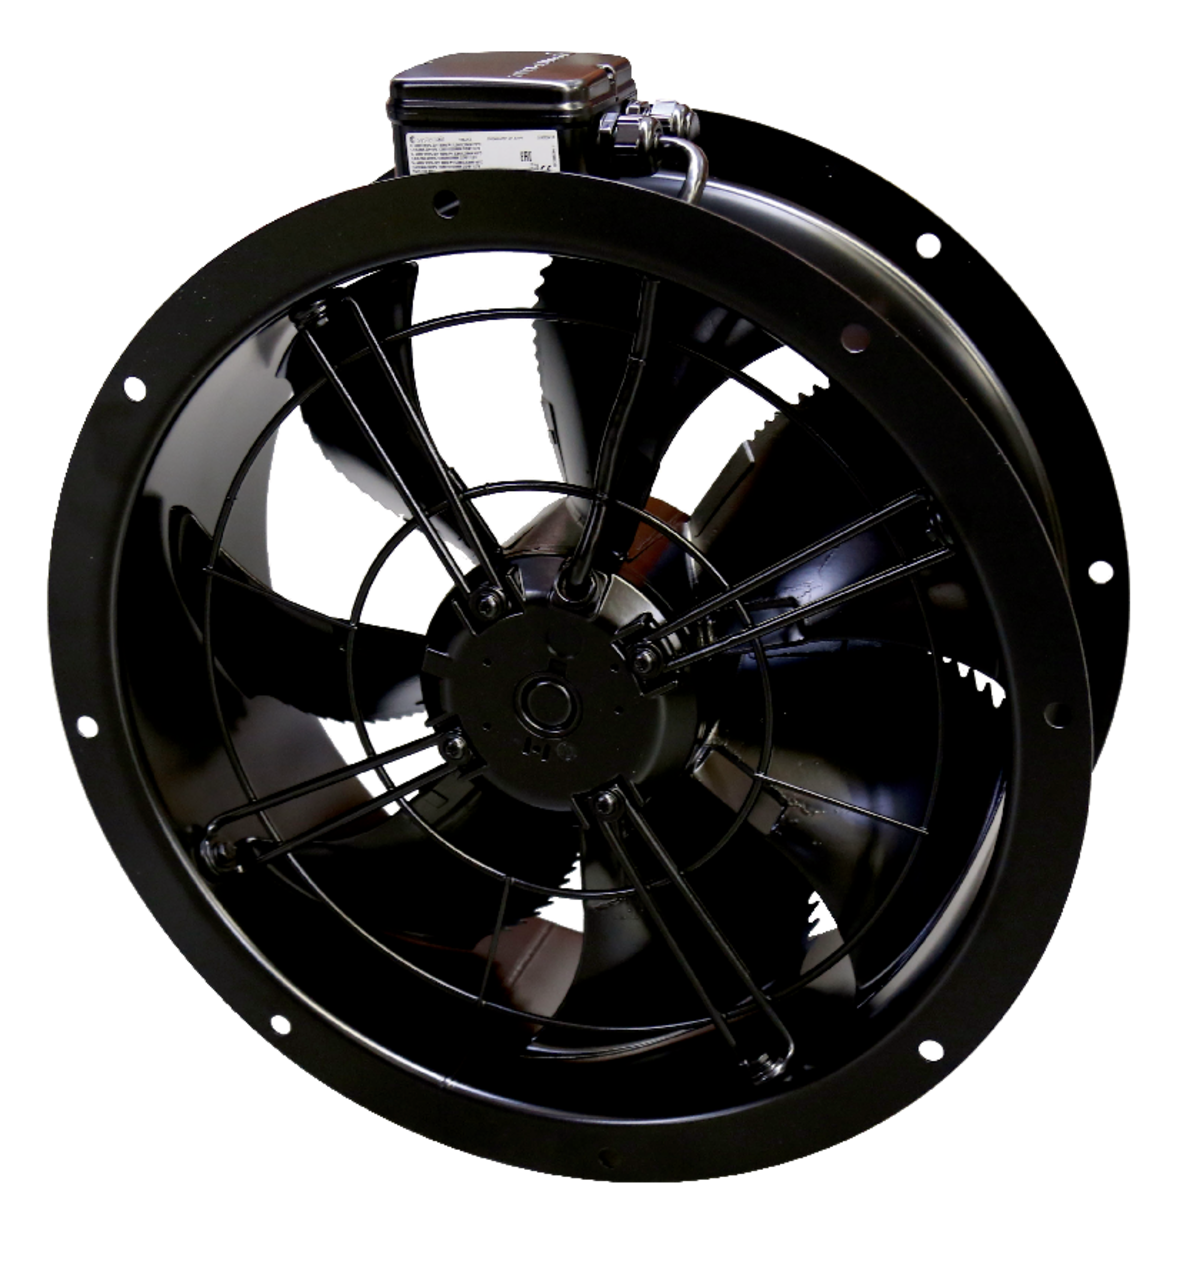 AR - Axial Fans - Fans - Products - Systemair